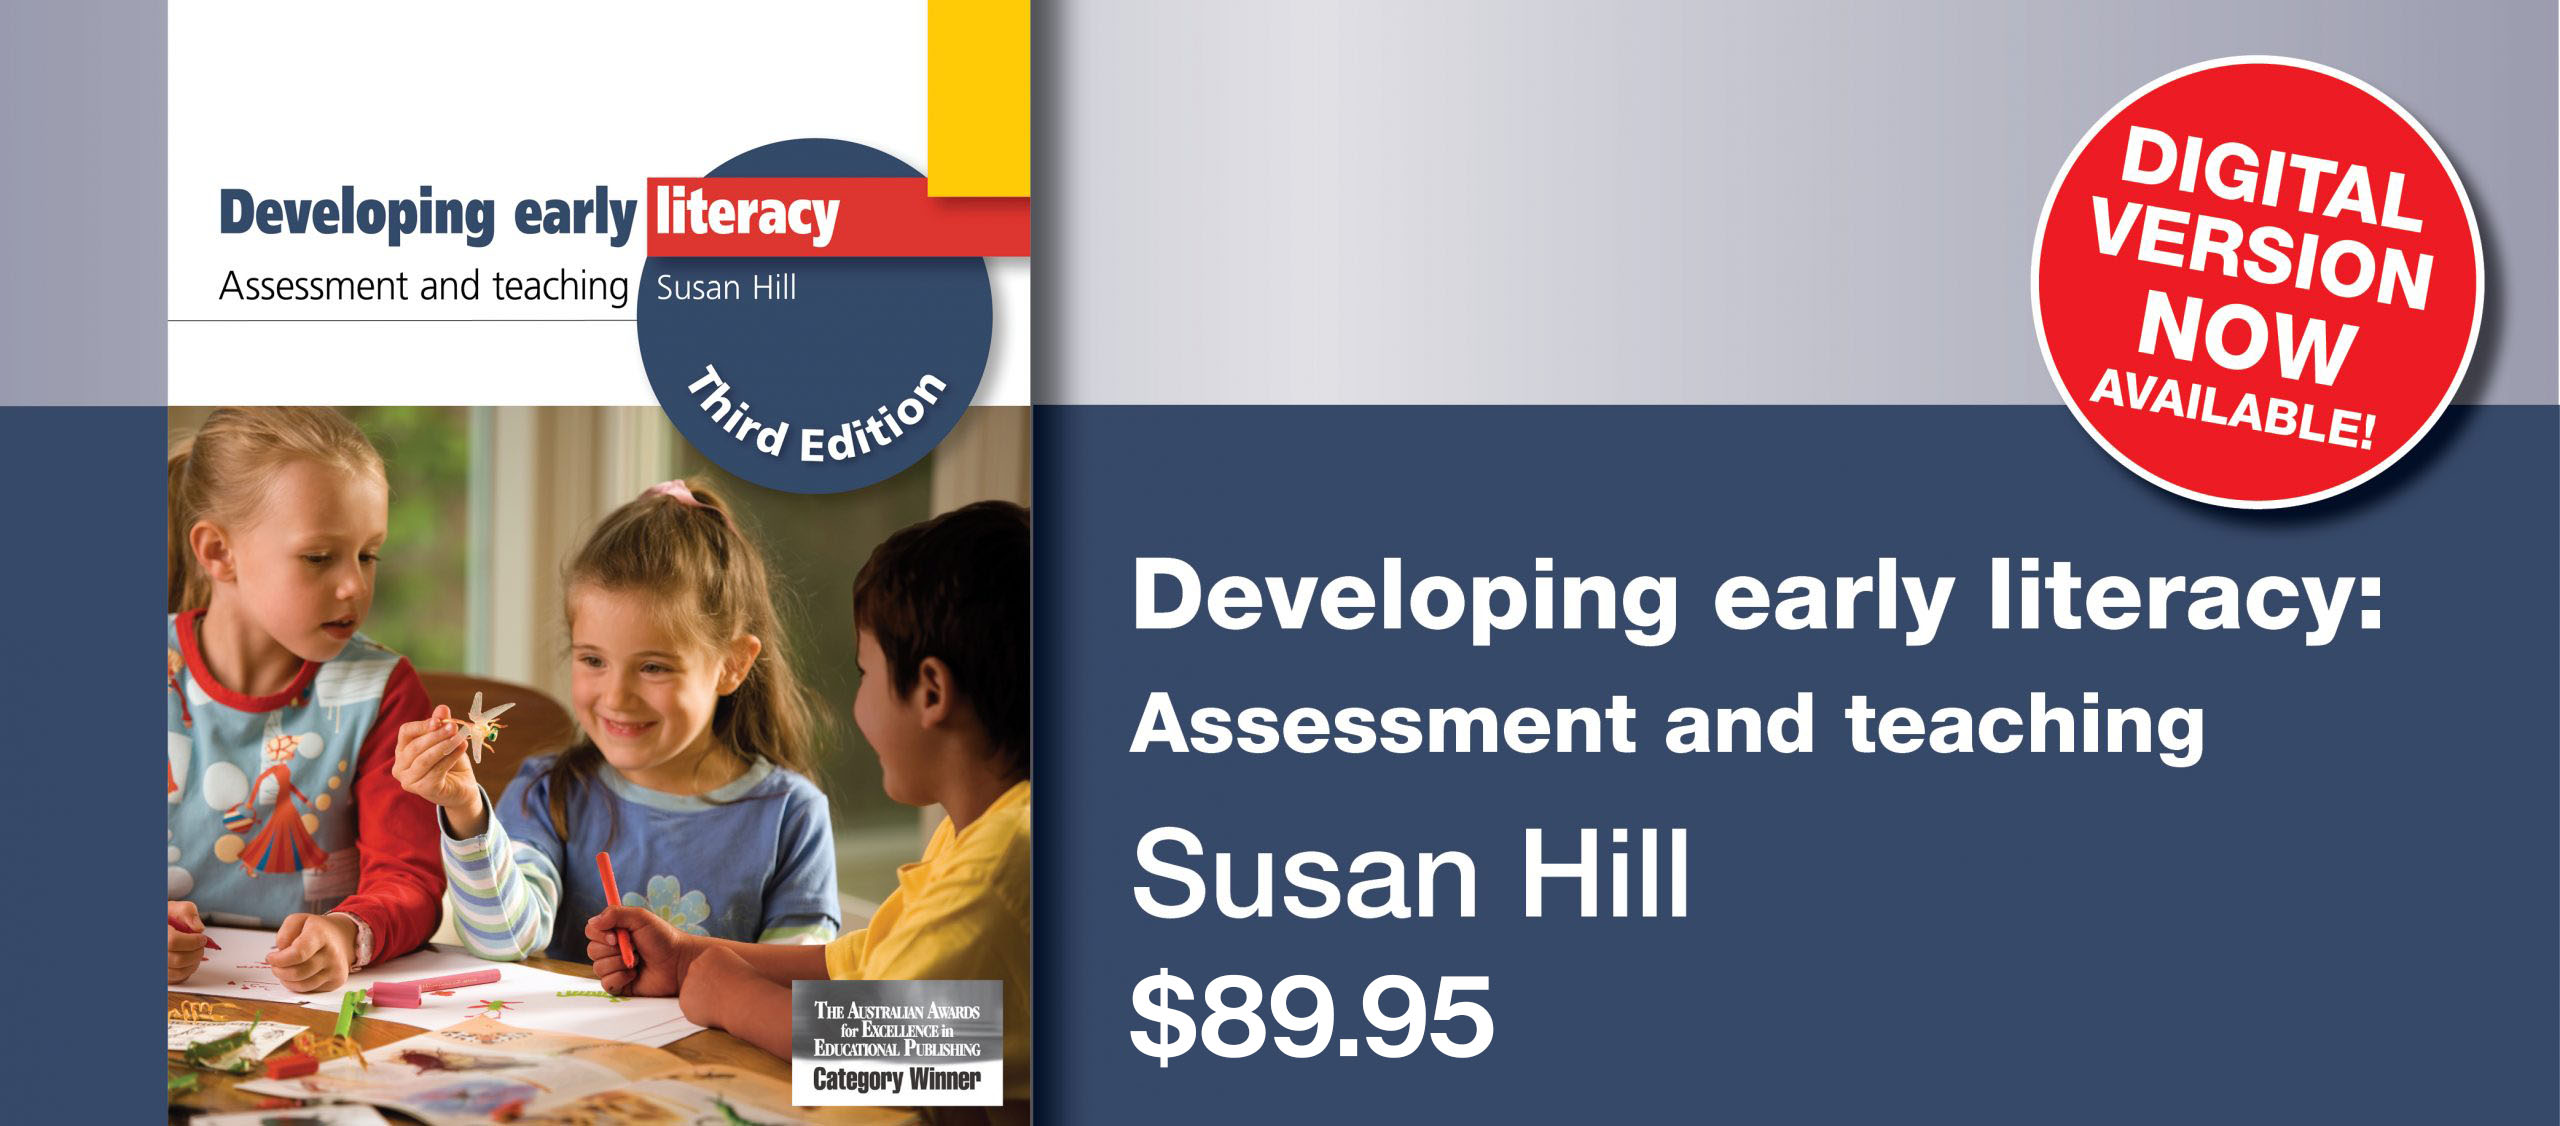 Developing early literacy